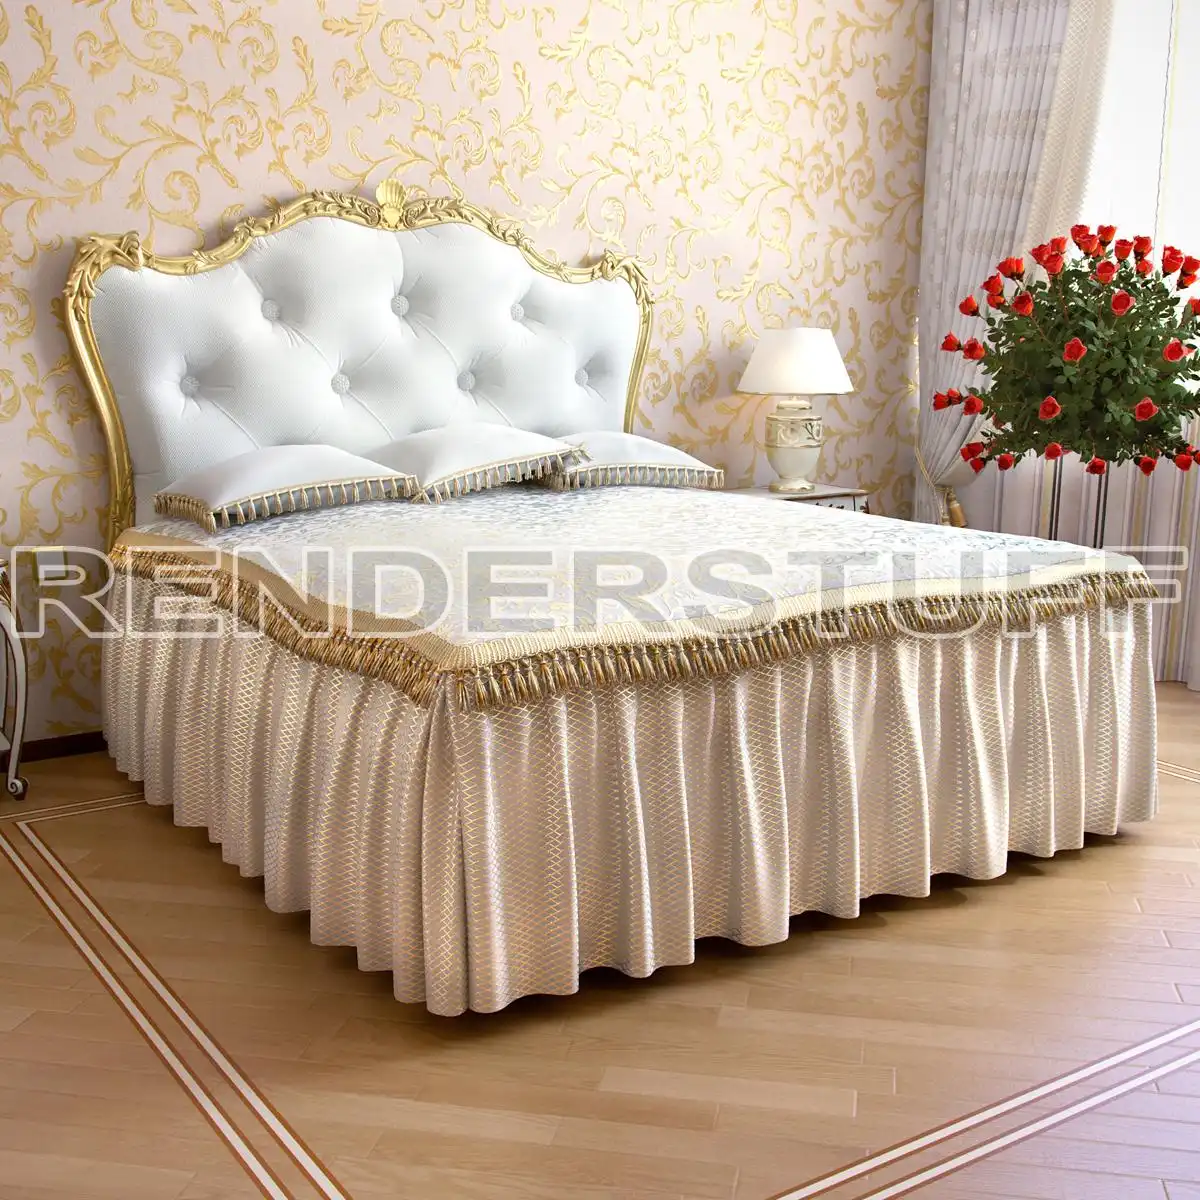 Bed Luxurious Classic With Pillows Free 3D Model